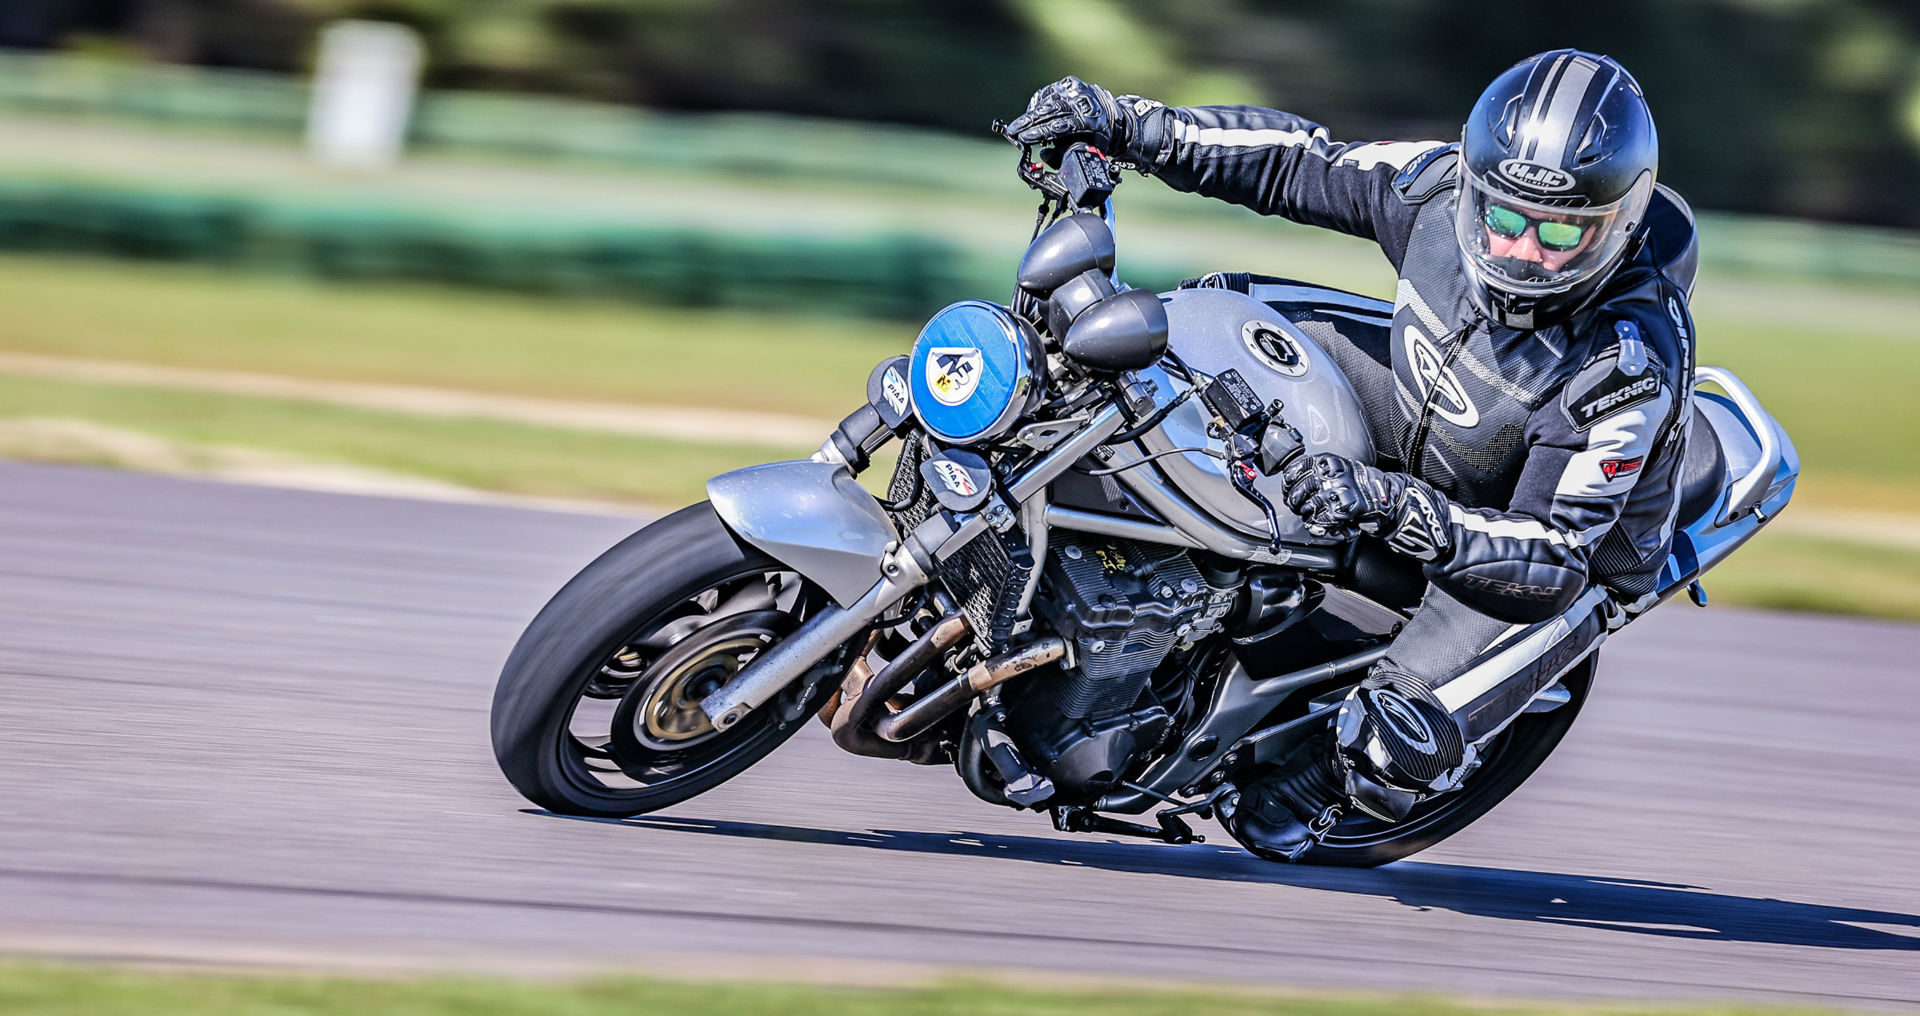 A rider in action during an N2 track day. Photo by Vae Veng/Noiseless Productions, courtesy N2.